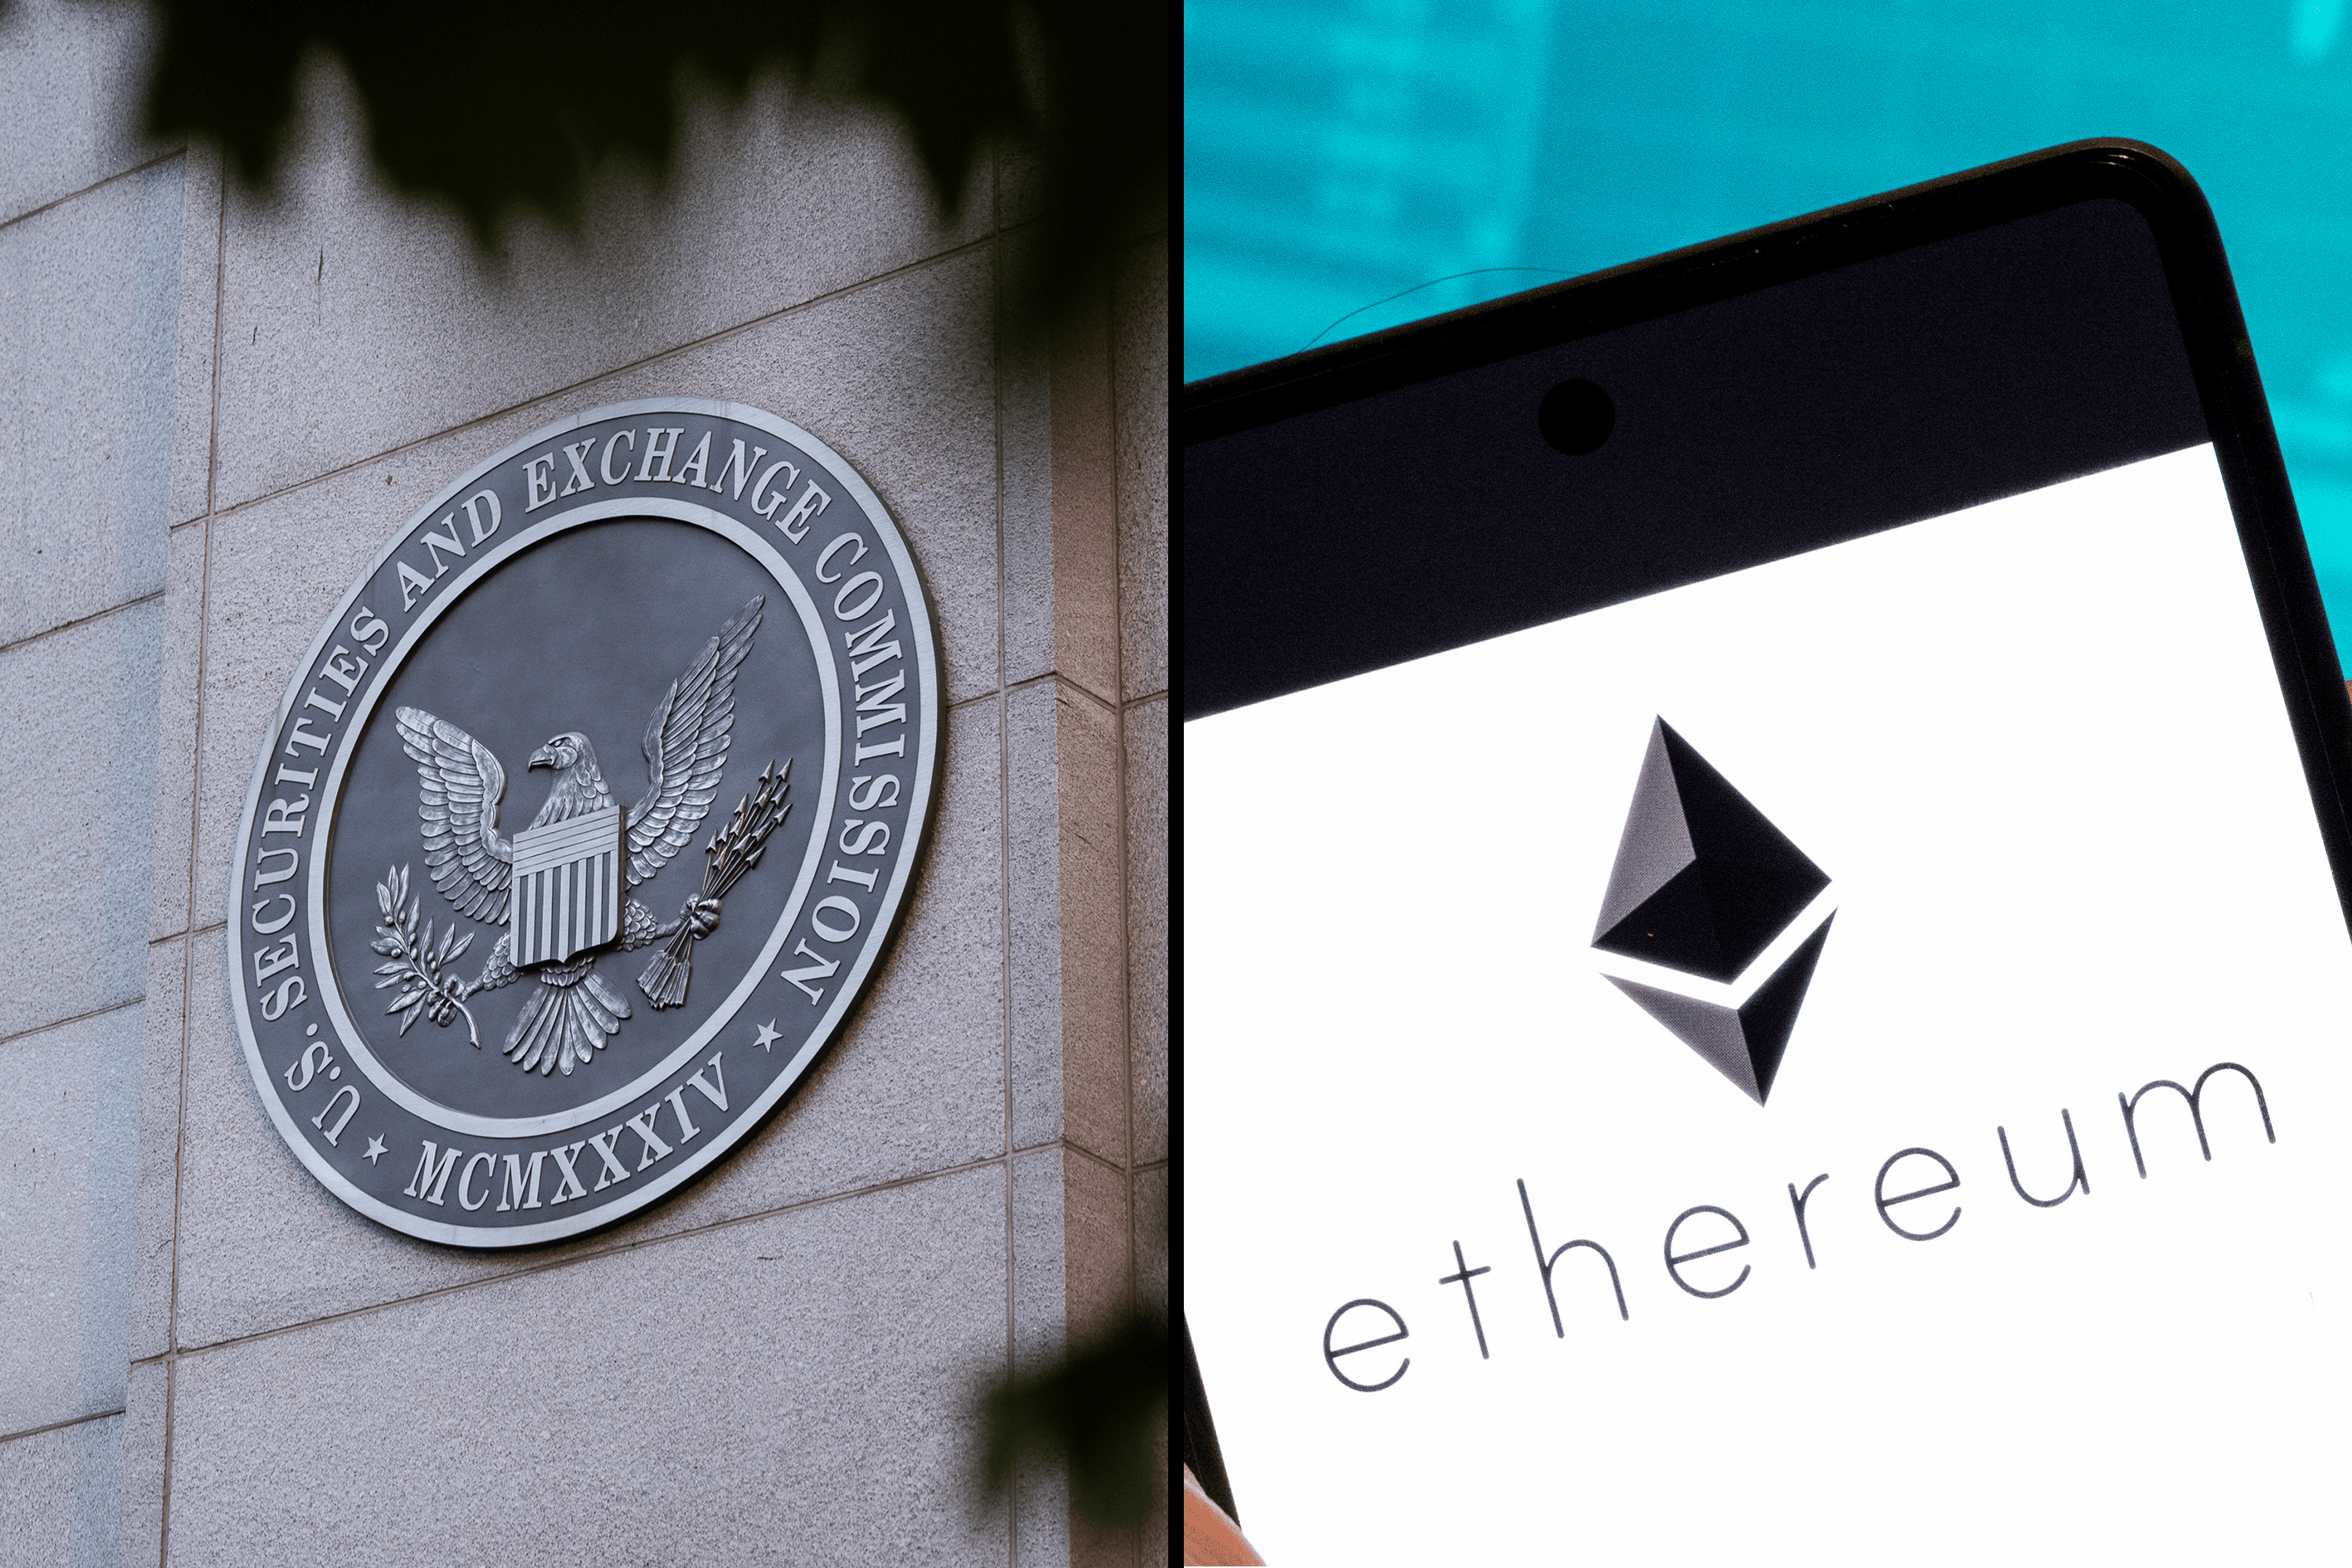 images of SEC and ethereum